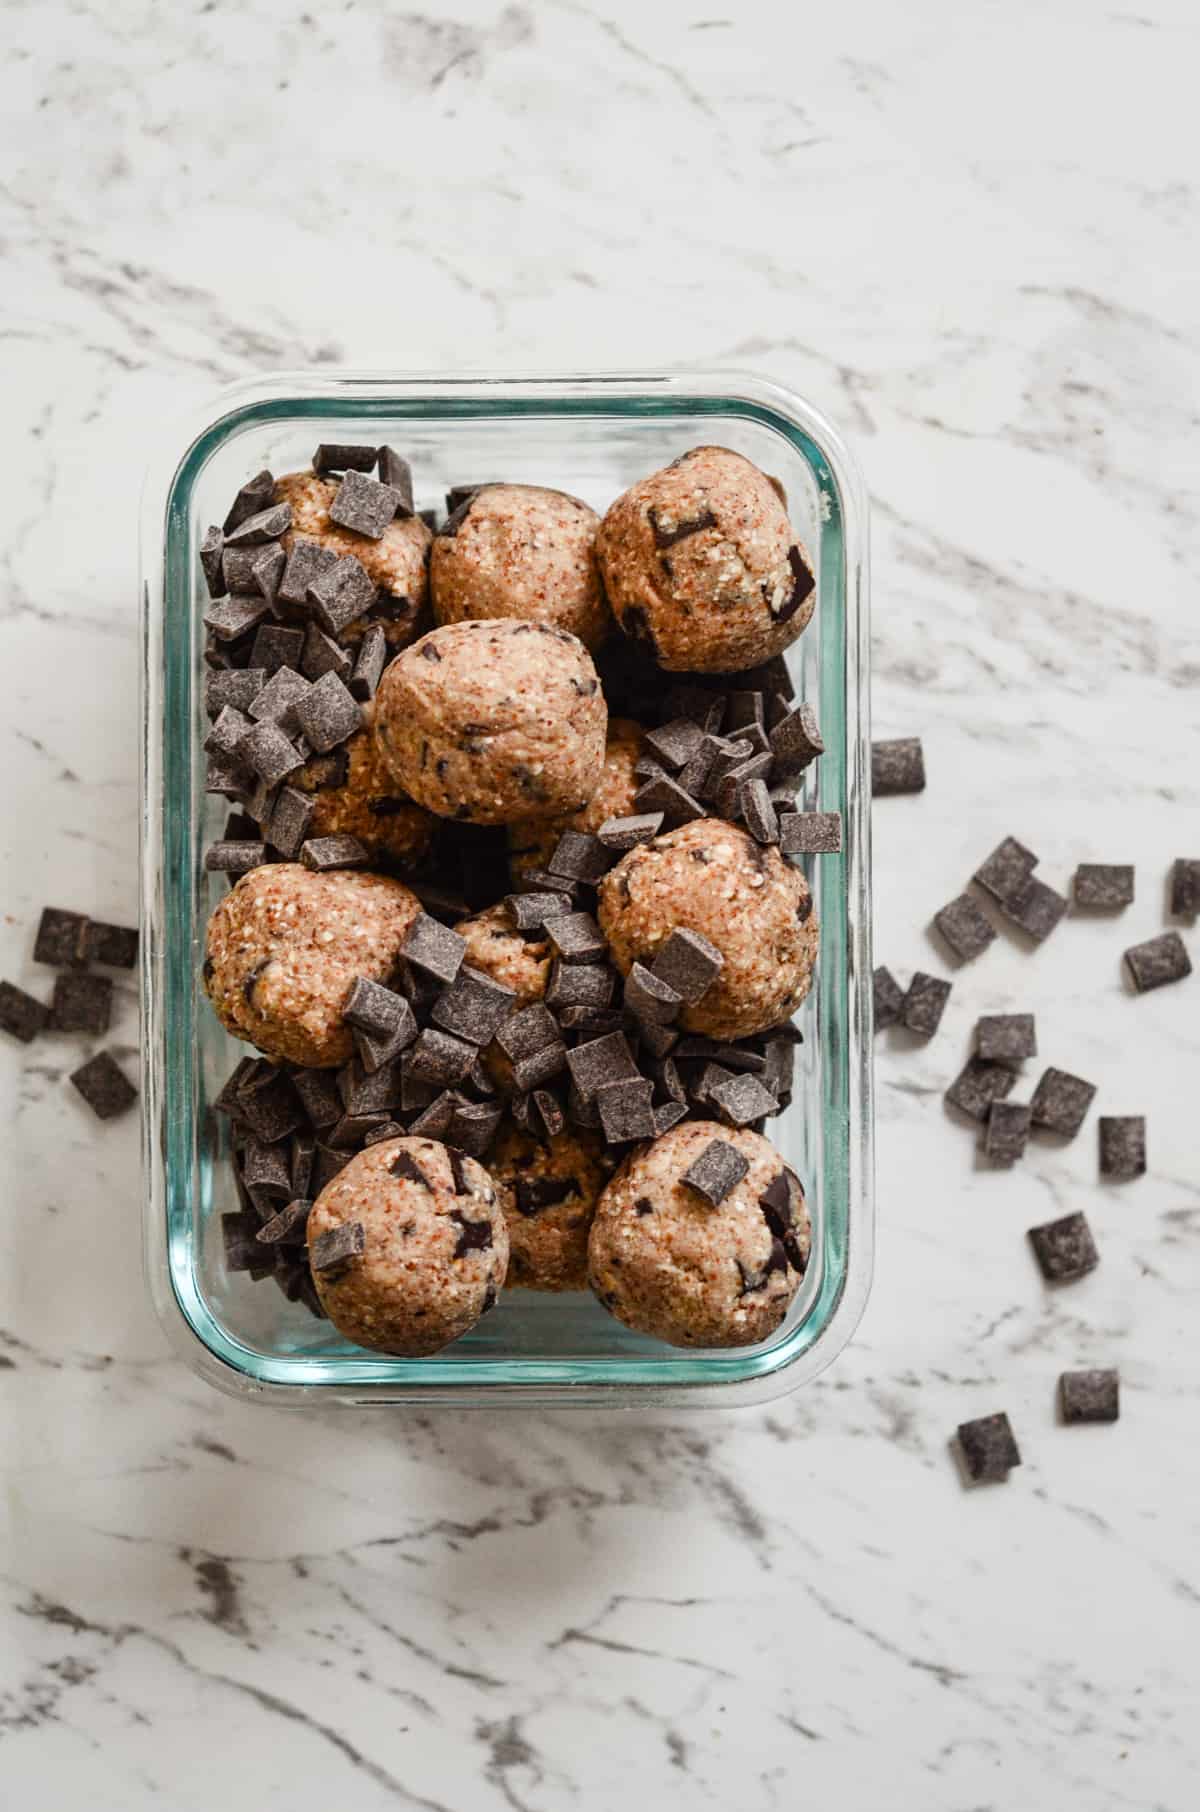 Brown energy balls with chocolate flakes in a glass square container.